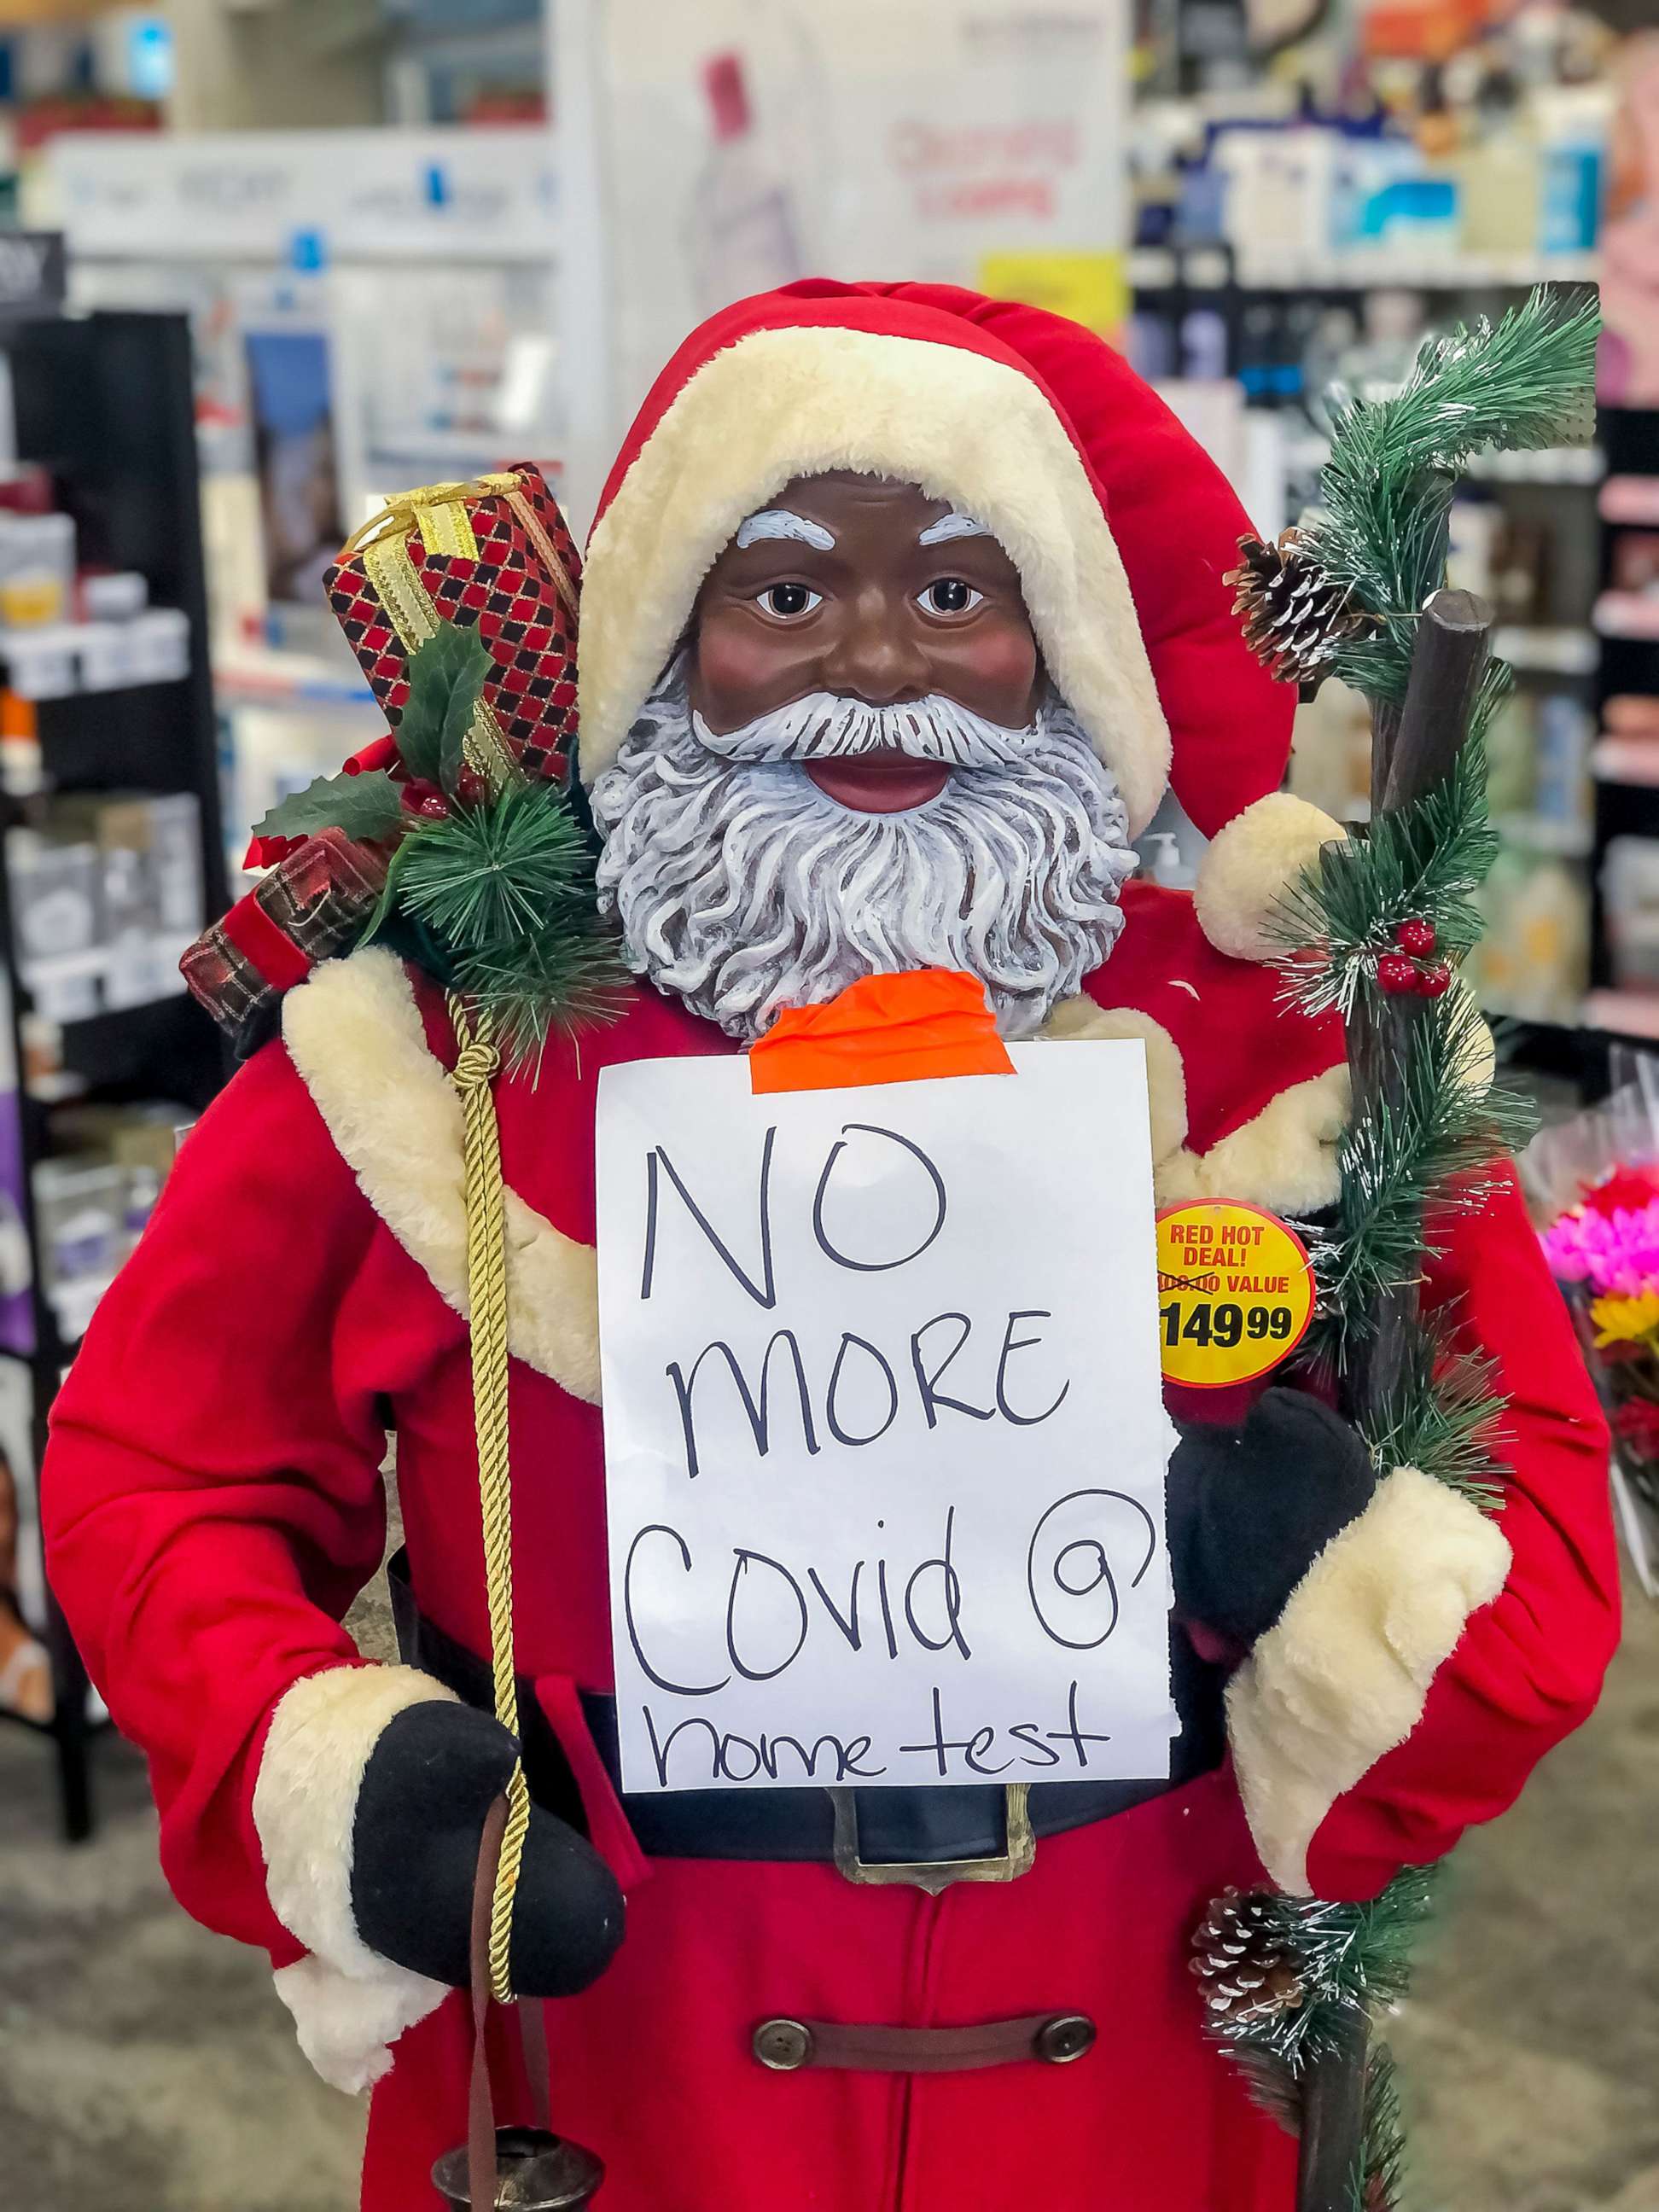 PHOTO: A Santa Claus on display at the entrance to a CVS Pharmacy announces the store has no more at-home COVID-19 test in Decatur, Ga., Dec. 20, 2021.